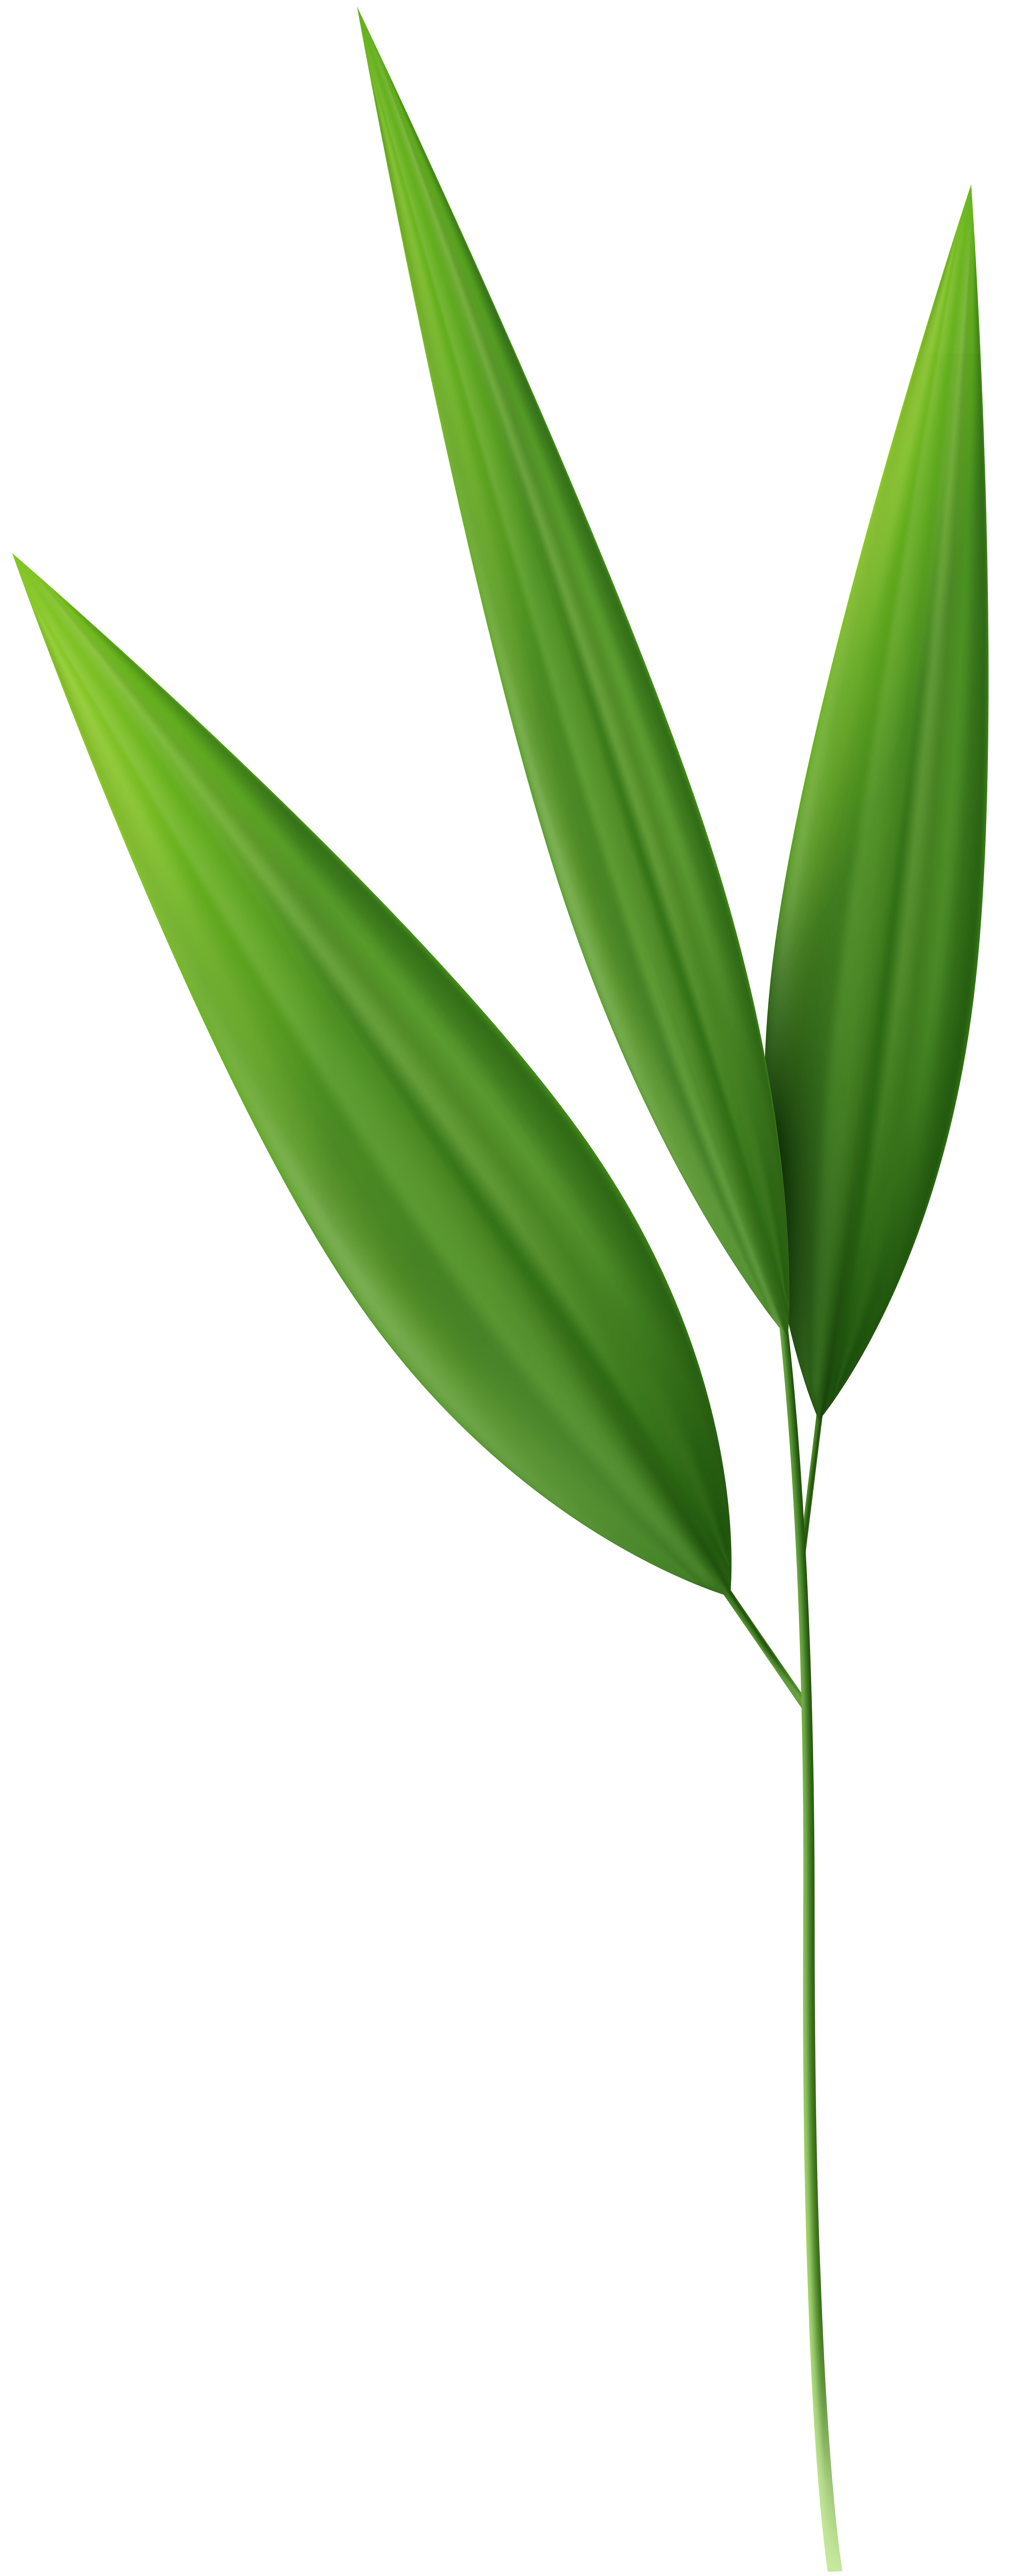 Bamboo clipart bamboo leaf. Leaves png gallery yopriceville